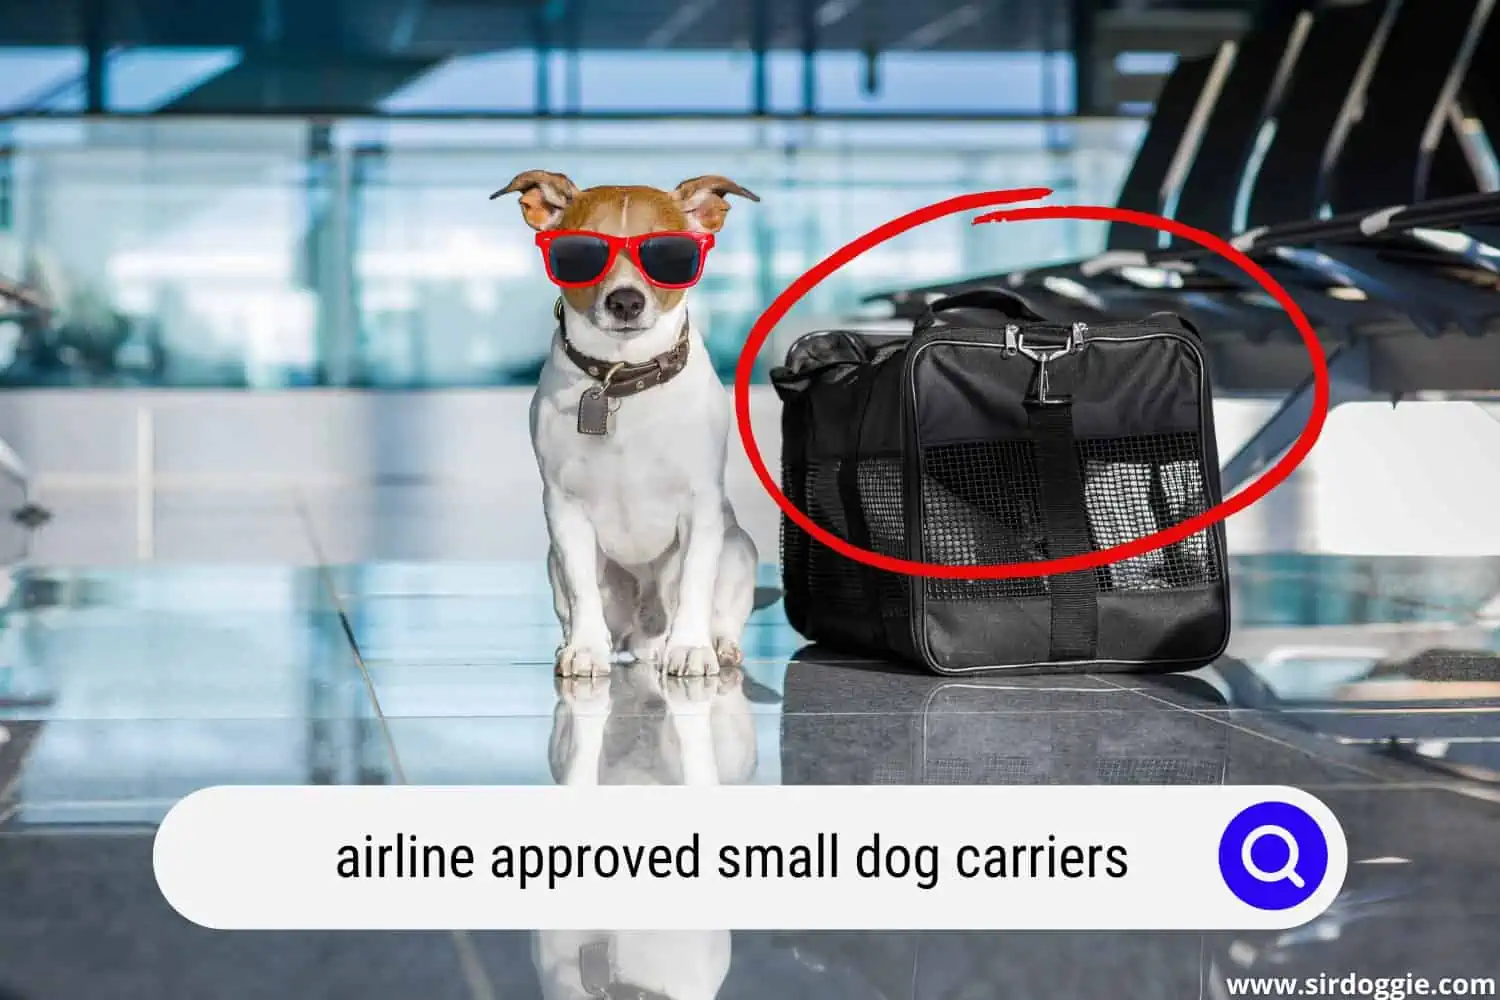 Cool small dog wearing sunglasses in airport with a dog carrier on the side